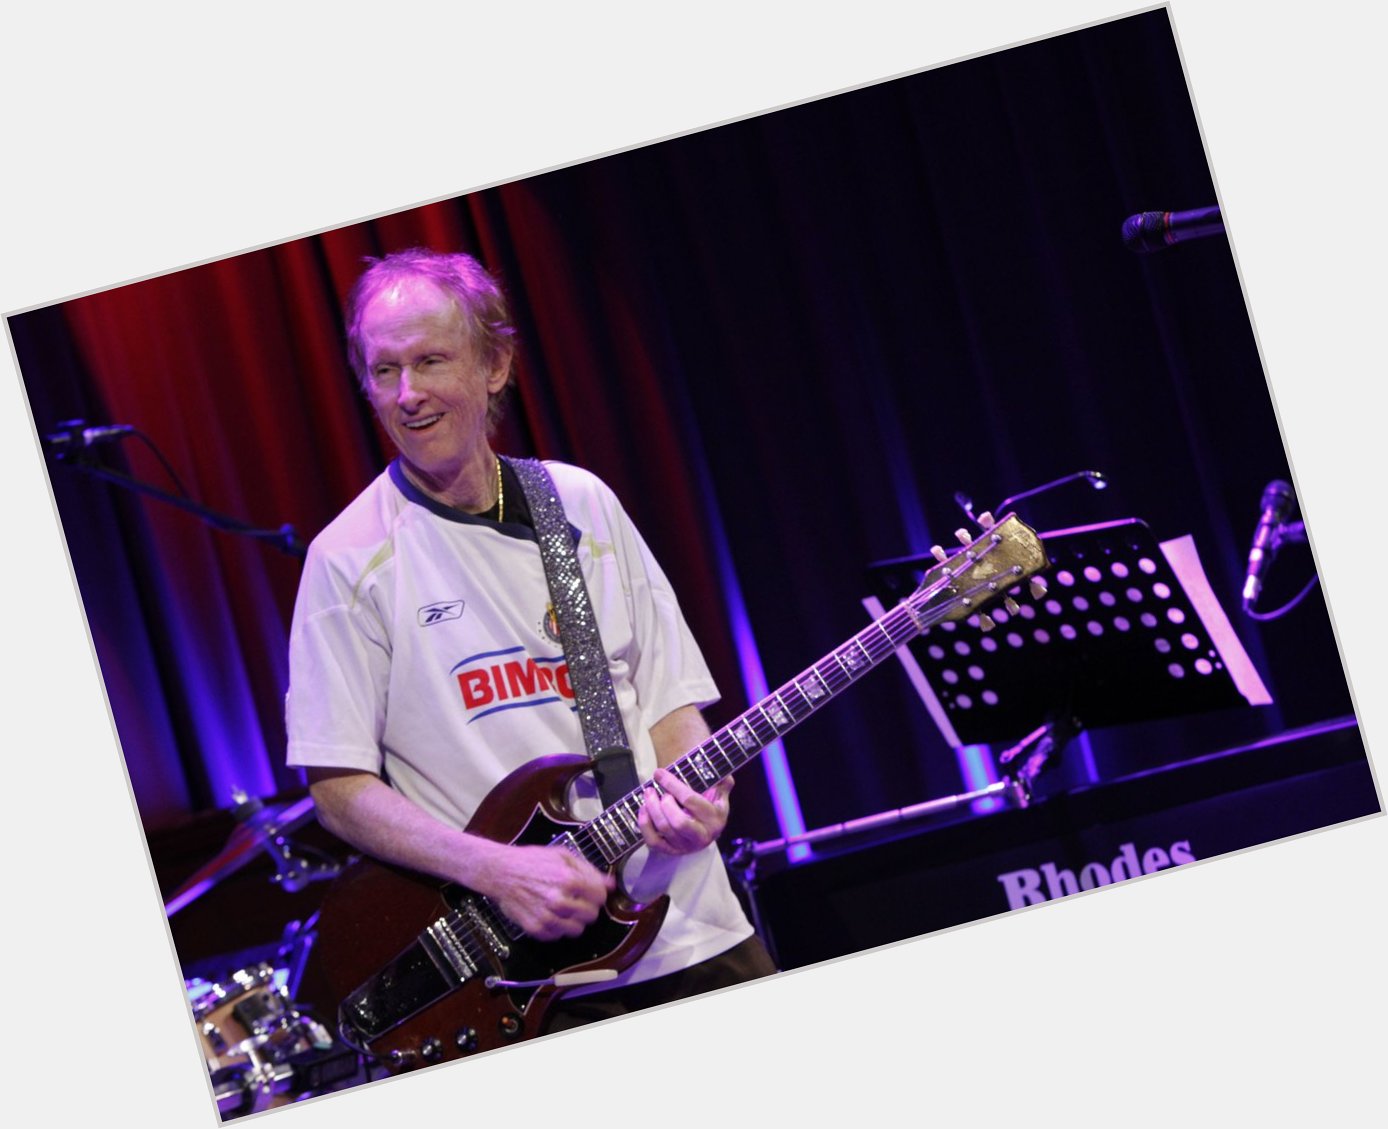 Please join me here at in wishing the one and only Robby Krieger a very Happy 75th Birthday today  